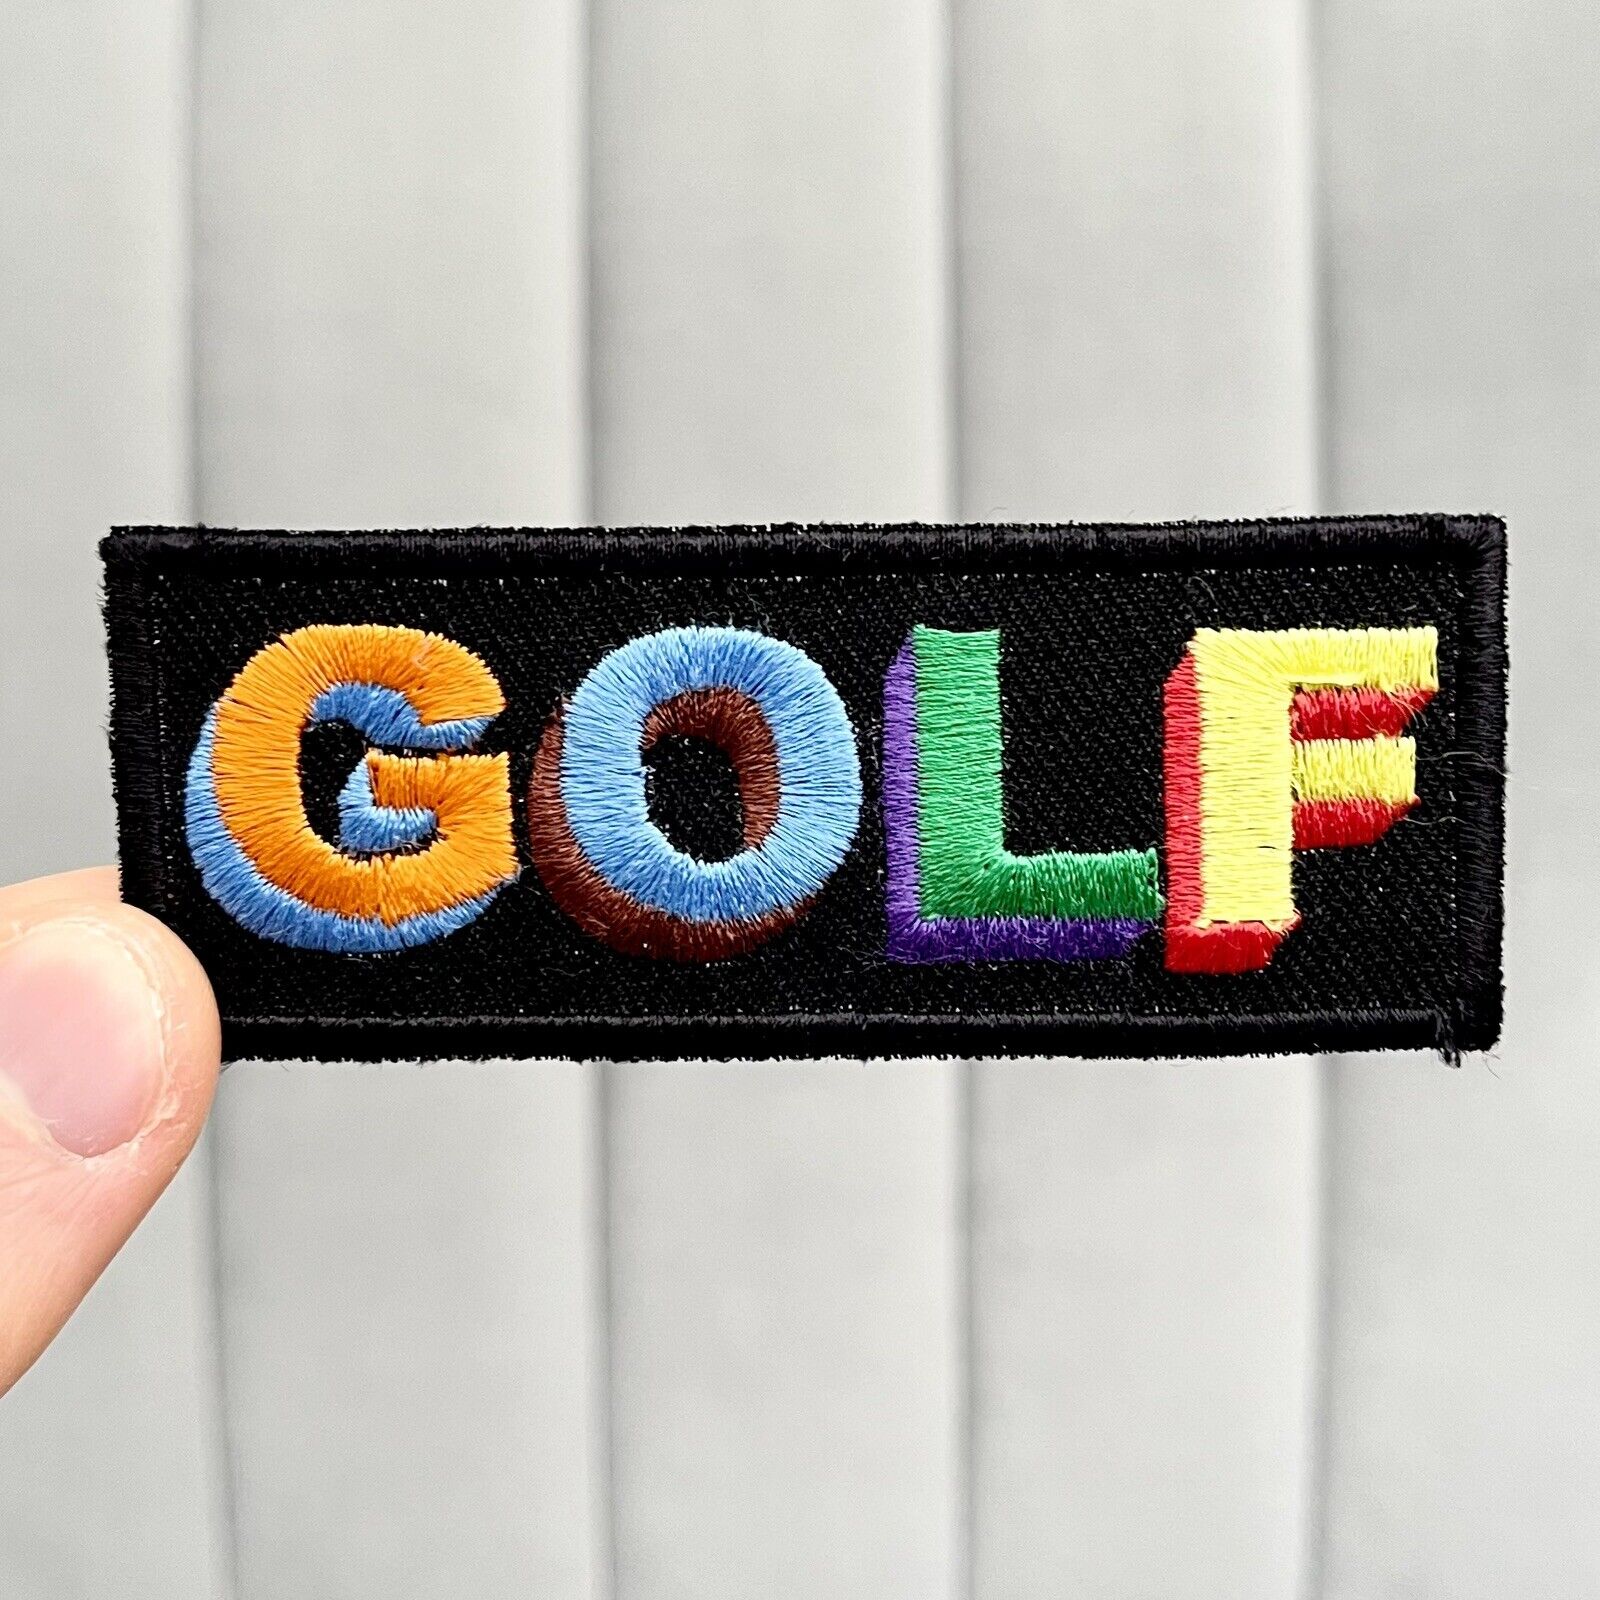 Golf Wang Odd Future Rare Iron-On Patch Vintage NOS OG Skateboard Embroidered